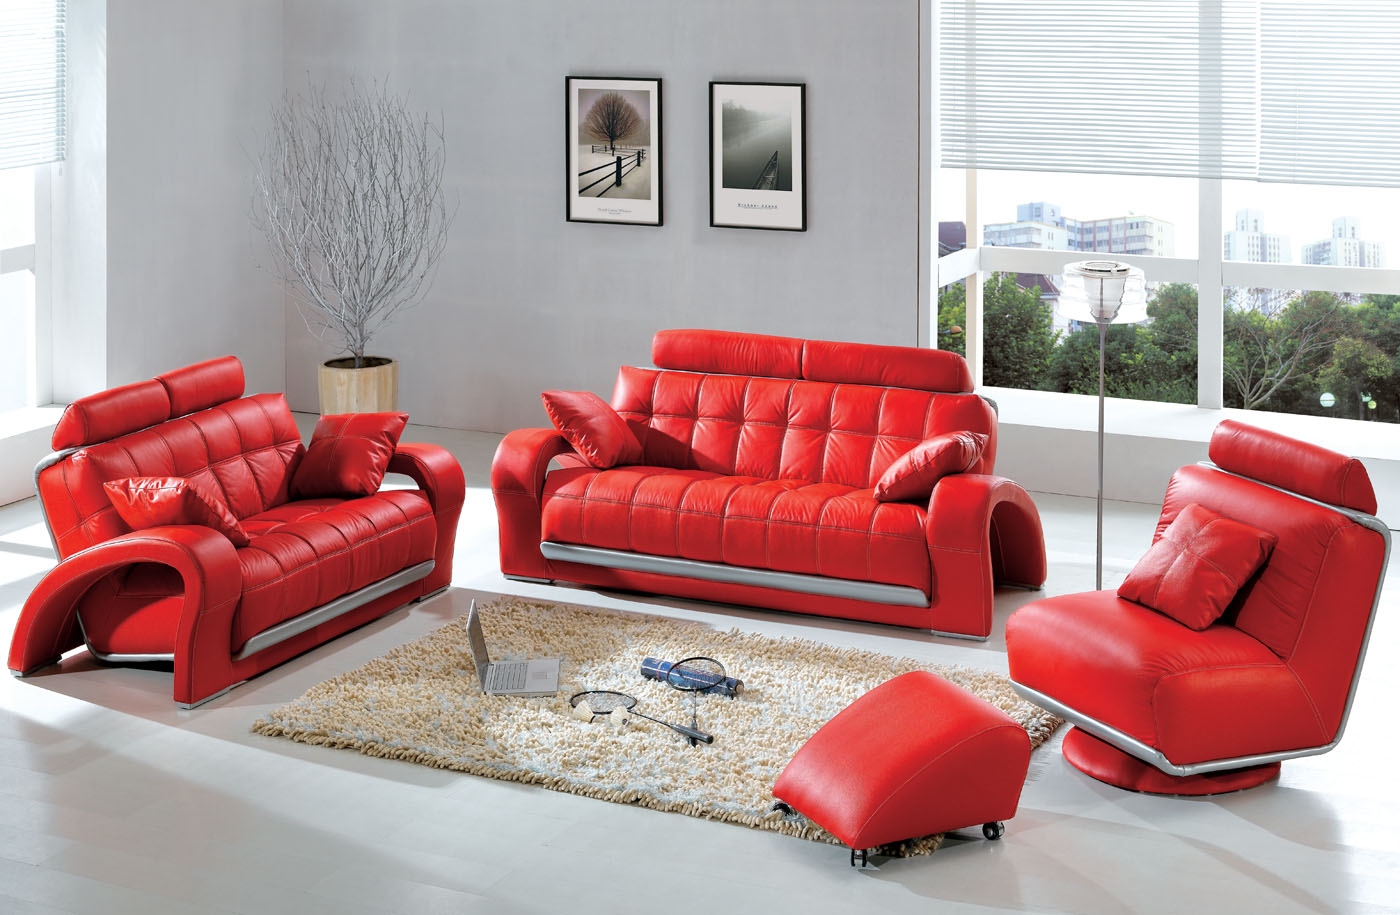 Cool red and gray living room